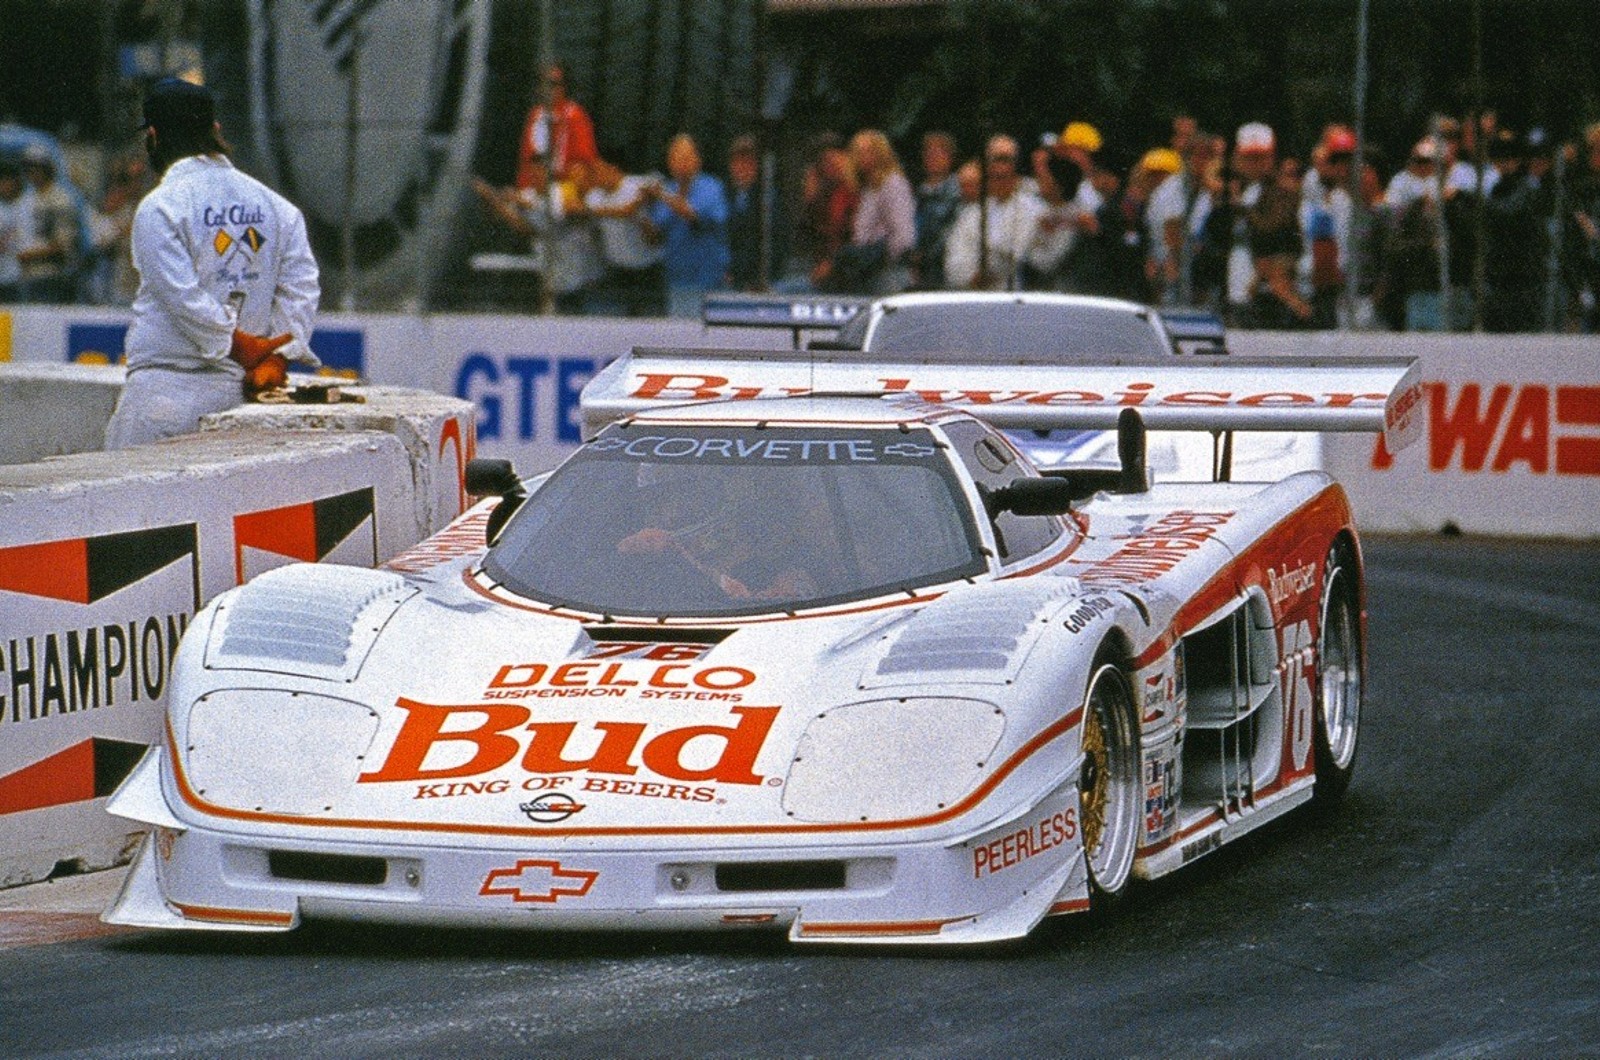 <p>The Chevrolet Corvette GTP, which stands for “Grand Touring Prototype,” was Chevrolet’s official factory team entry in the IMSA Camel GT from 1984 to 1989. The advanced design of the Corvette GTP featured a massive 10.2-liter V8 big block engine, as well as mechanical improvements.</p><p>Despite a turbulent performance history, the Corvette GTP earned several significant finishes and secured two first-place victories in 1986. The GTP continually strove for performance improvements throughout its use, and stood up against dominant forces like Porsche.</p>